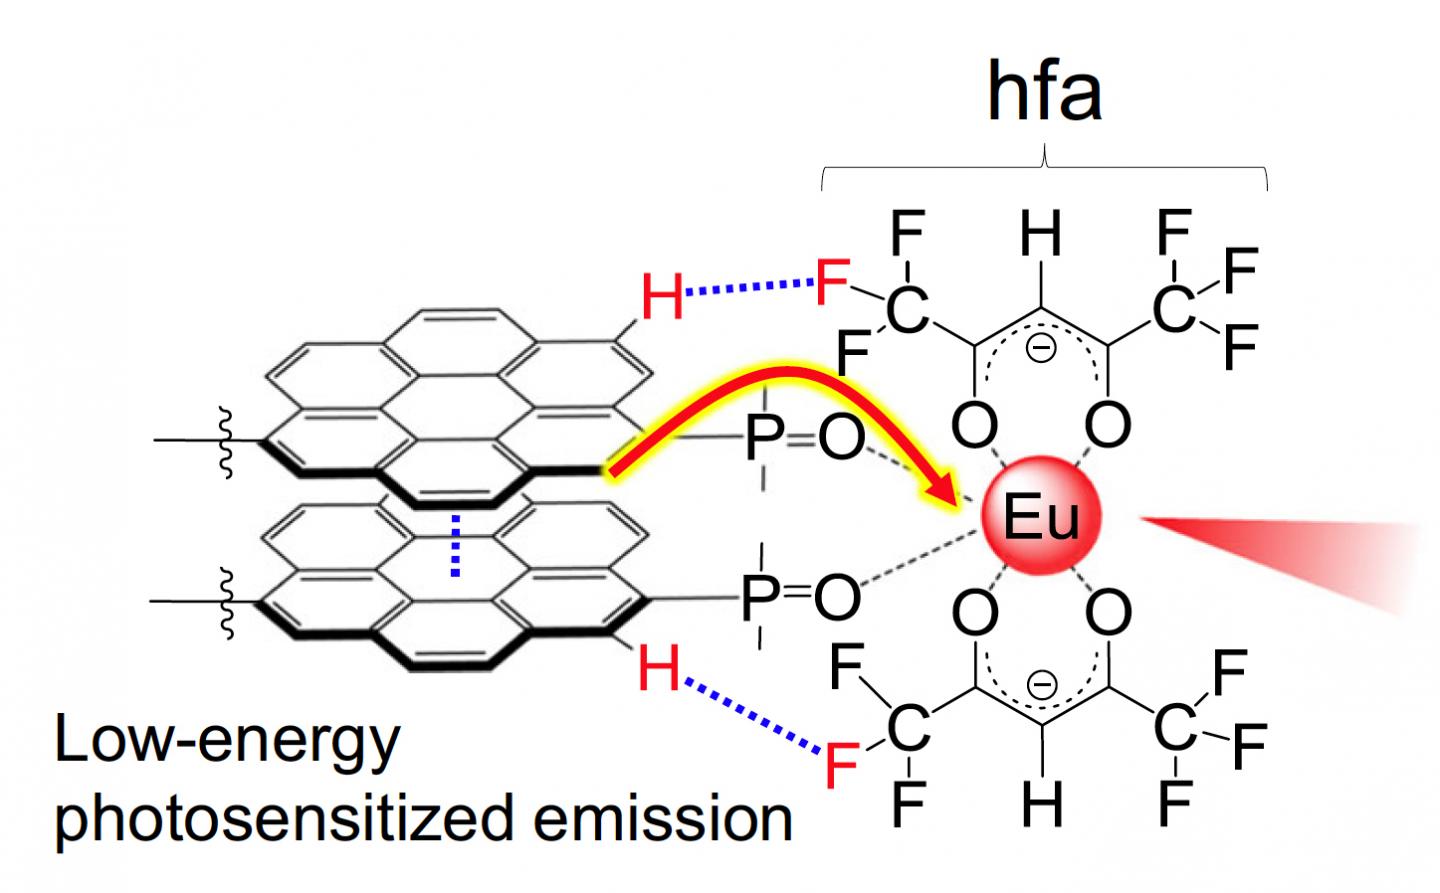 The Eu(III) complex containing the stacked nanocarbon structure. The nanocarbon structure works as an antenna to harvest light and transfer the energy to europium efficiently, which then emits red light. Courtesy of Kitagawa Y., Hasegawa Y., et al., Communications Chemistry, January 3, 2020.